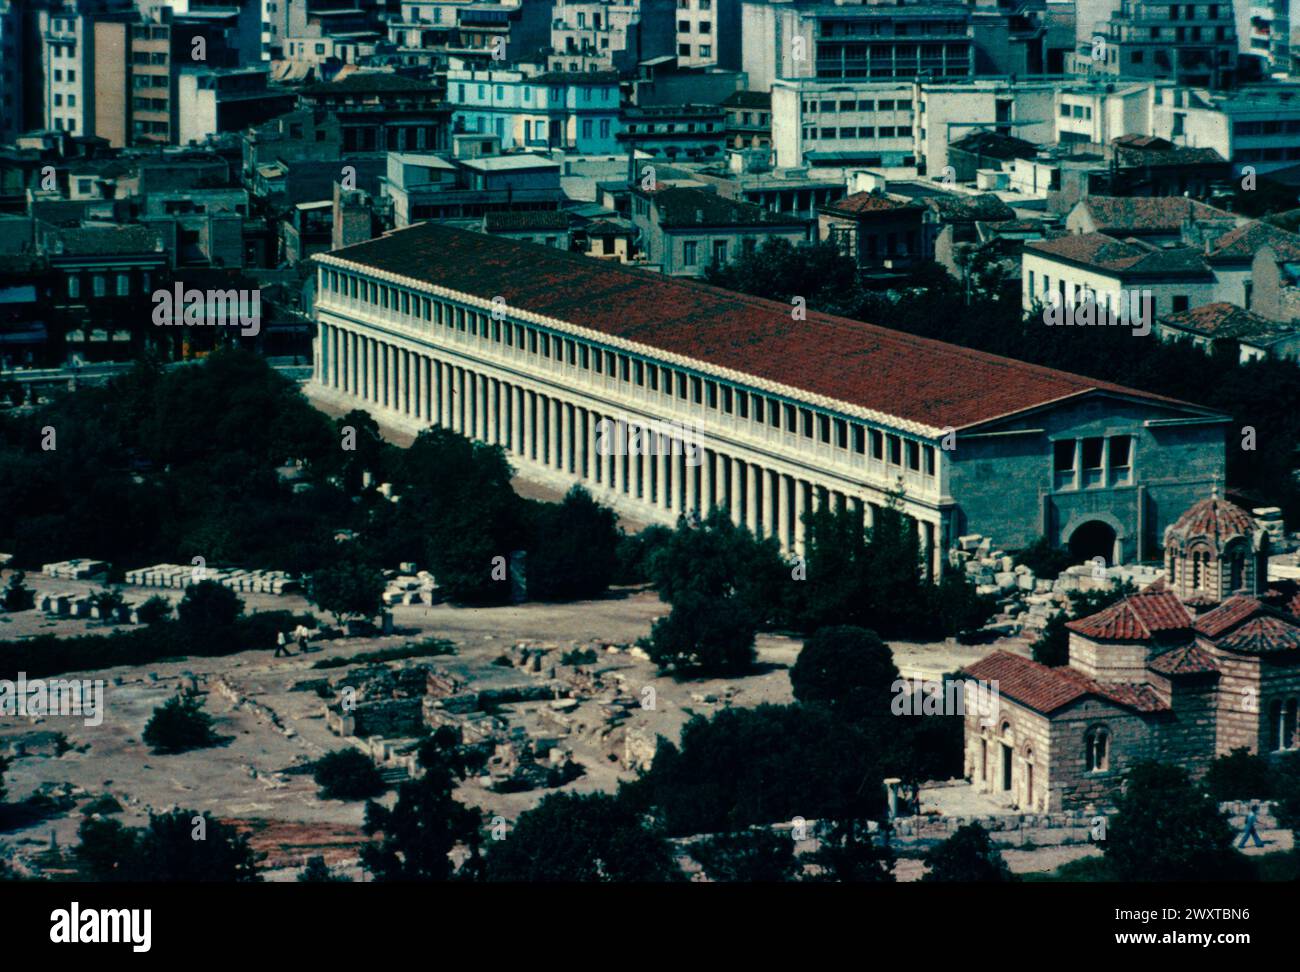 The Agora with the porch of Attalus, Athens, Greece 1980s Stock Photo